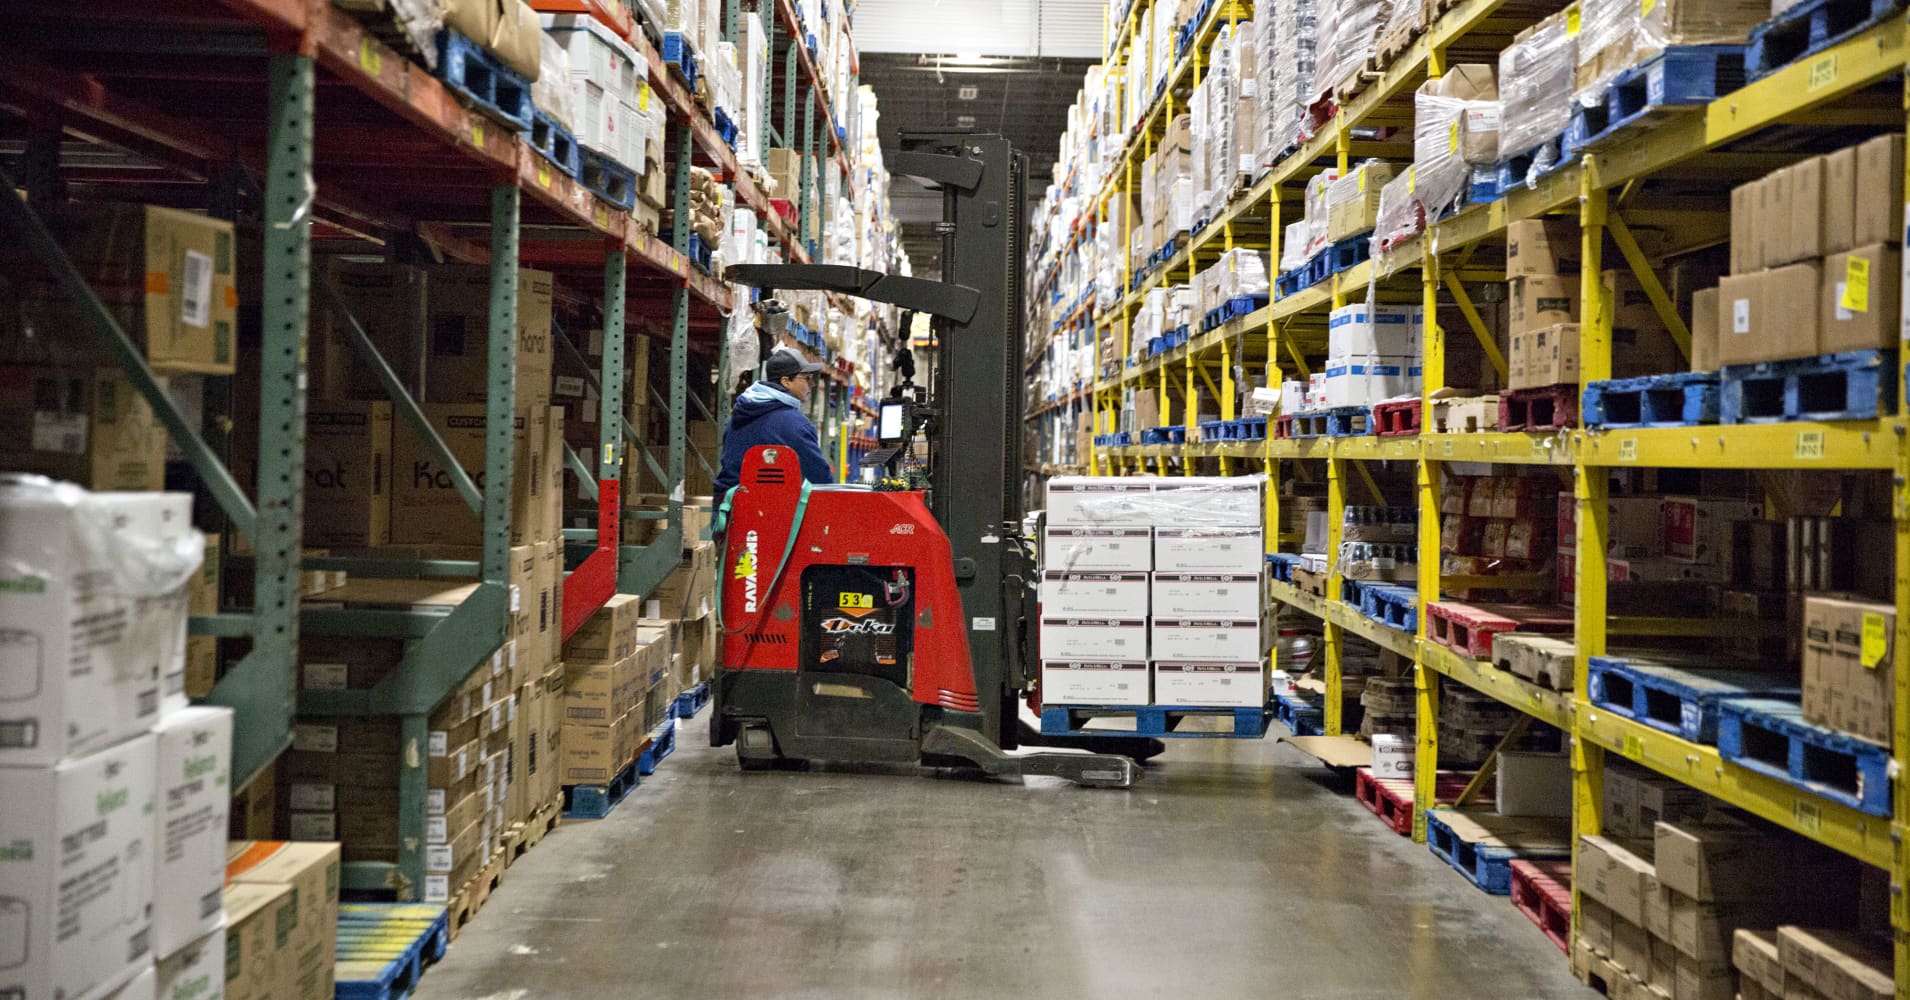 The surge in online-shopping returns has boosted the warehouse sector